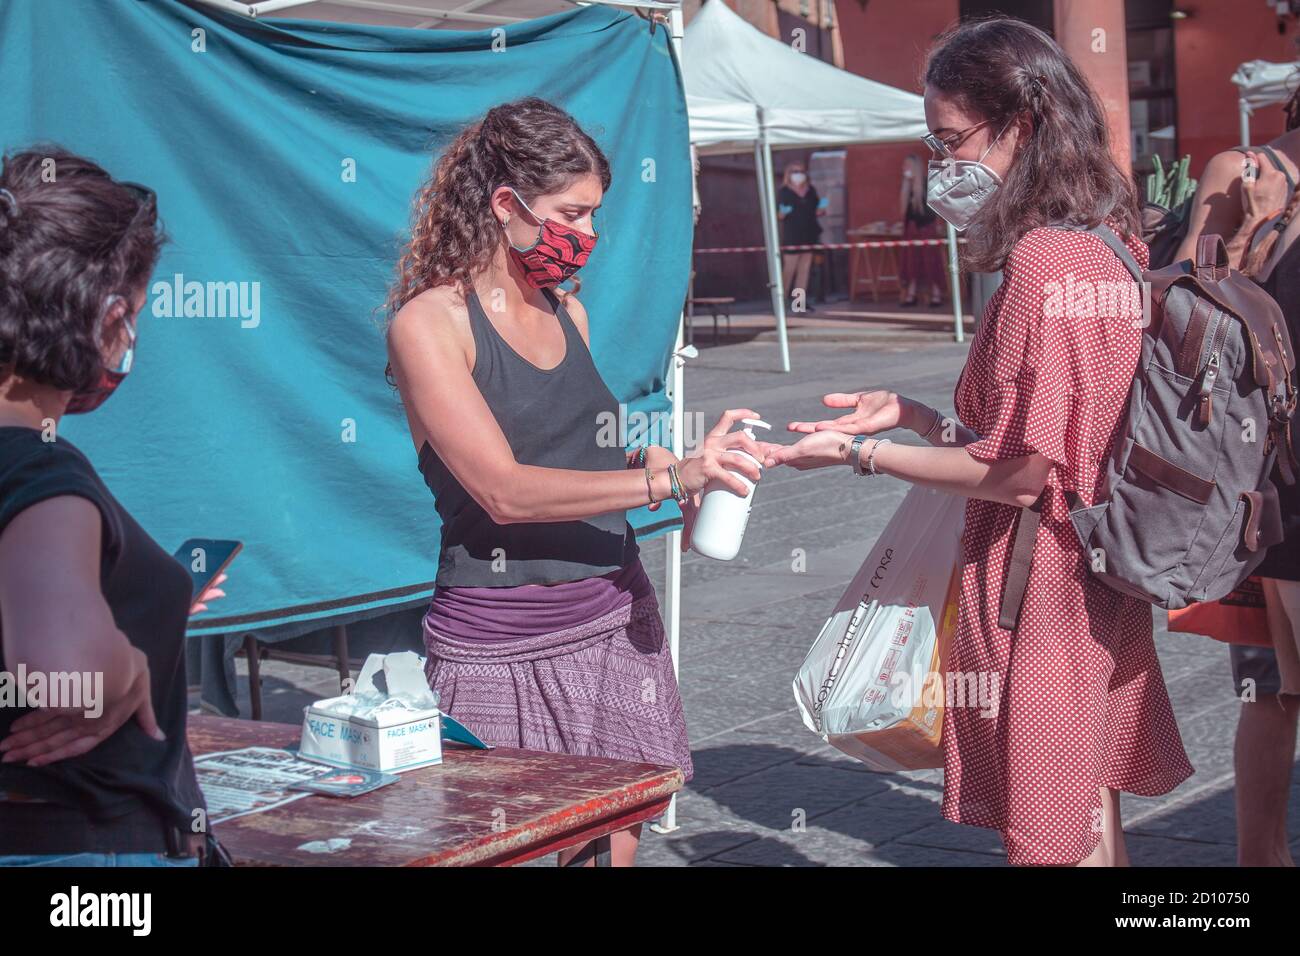 Bologna: young volunteer sanitizes the hands of a customer before entering the outdoor fruit and vegetable market (Covid-19 2020 pandemic) Stock Photo